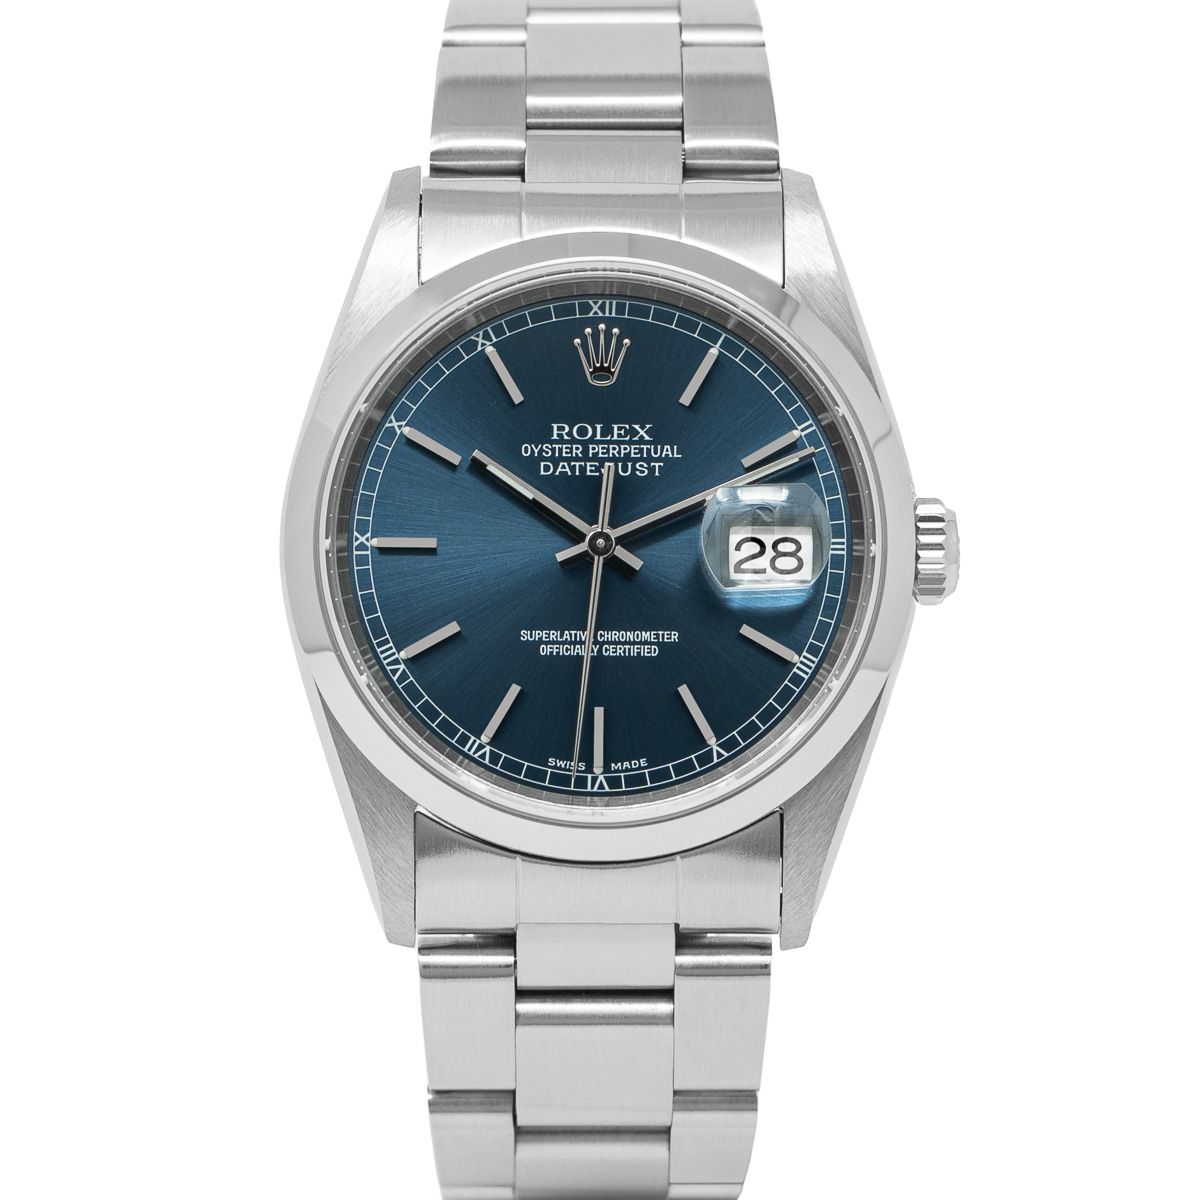 Gallery photo of the Rolex Datejust 16200 with a blue dial and Oyster Bracelet